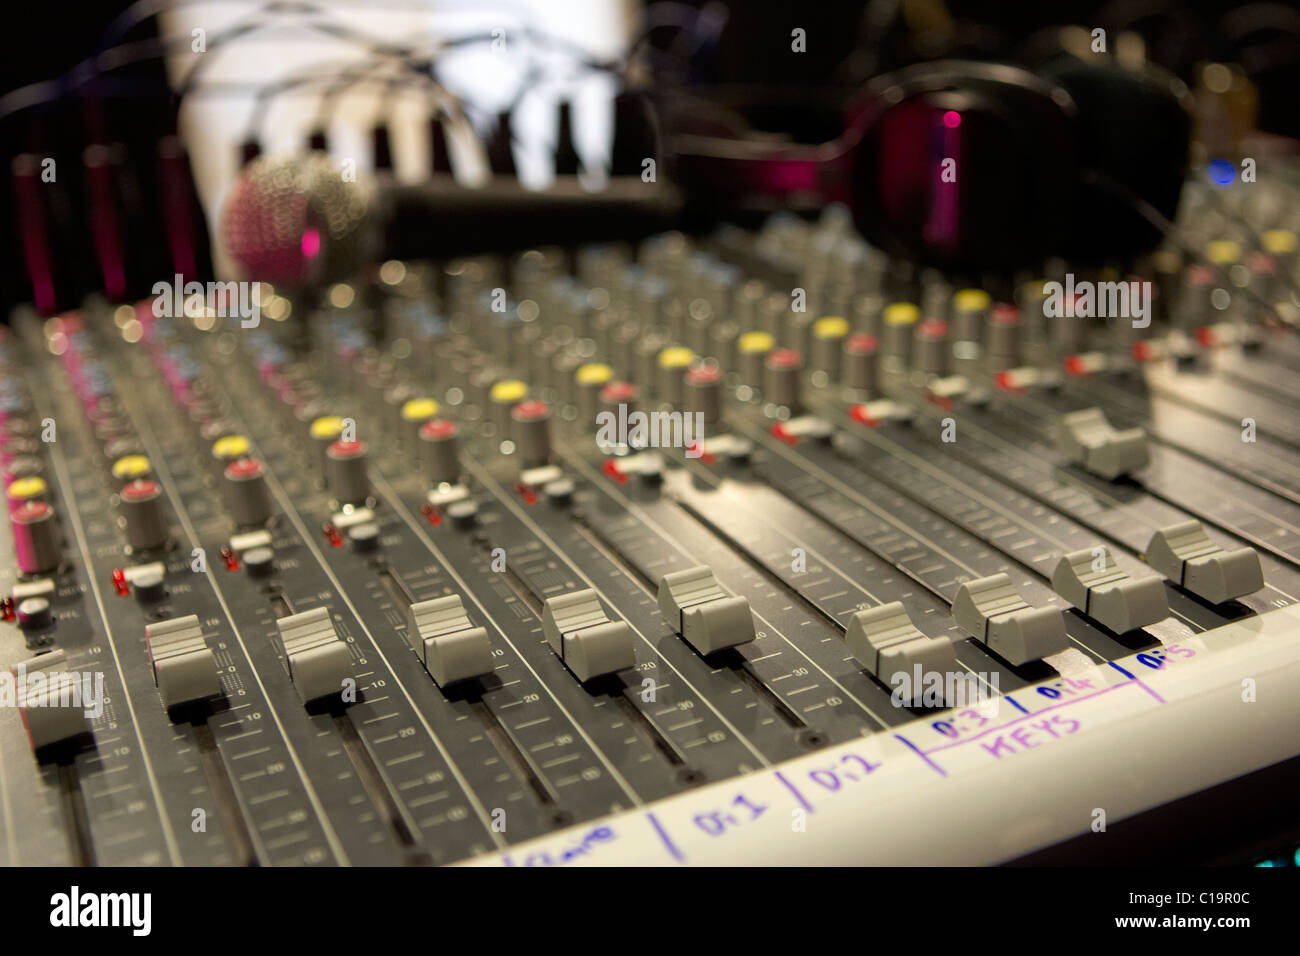 slider controls on audio mixing desk in a theatre concert hall Stock Photo